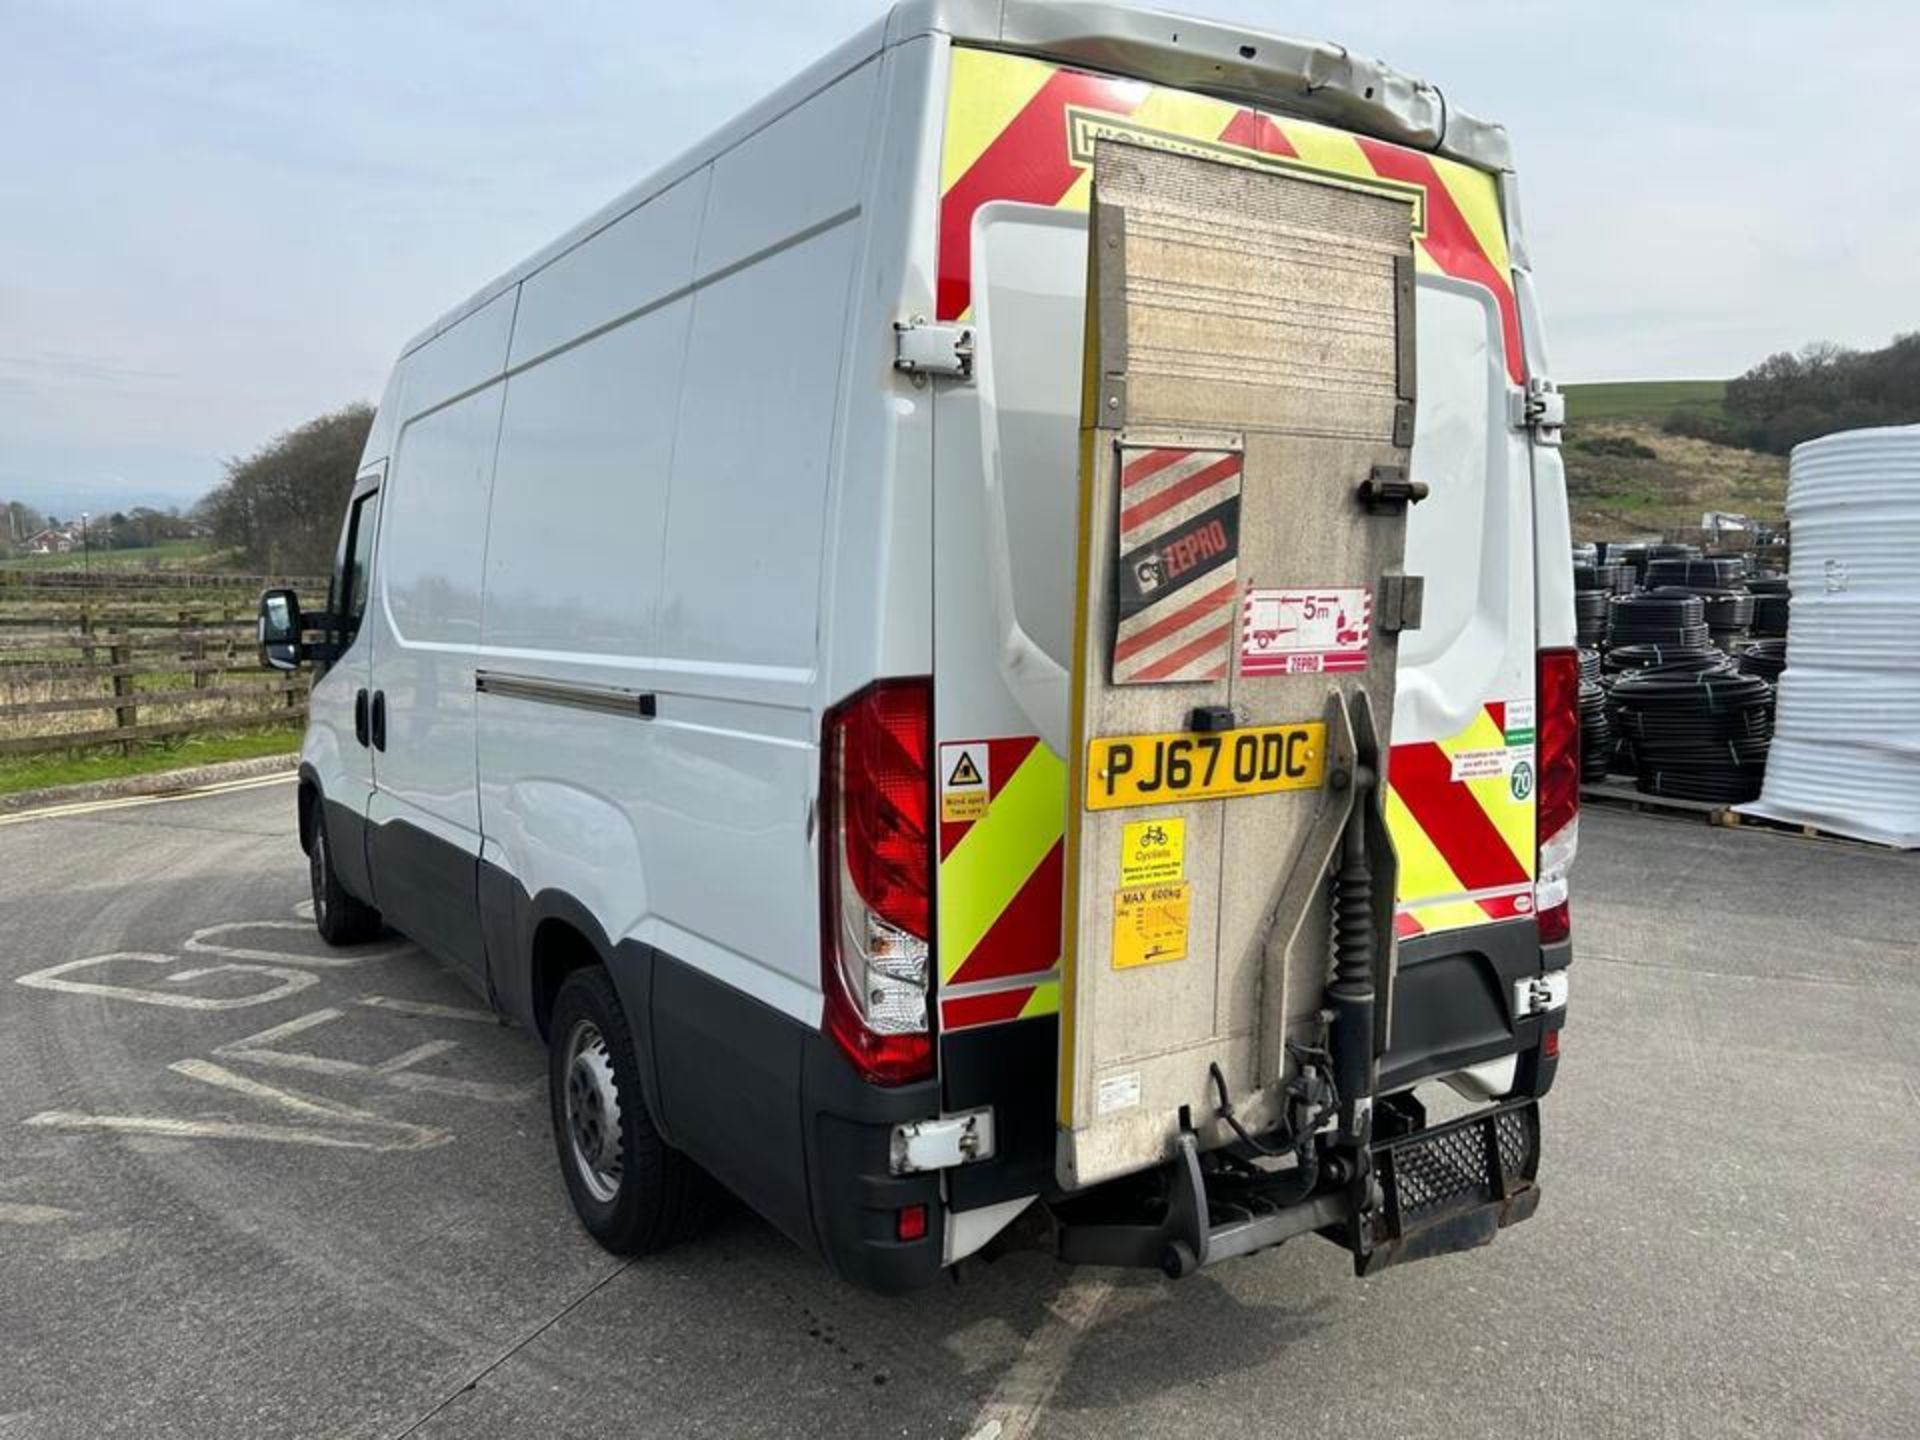 2017 IVECO DAILY -123K MILES - HPI CLEAR- READY TO WORK! - Image 11 of 13